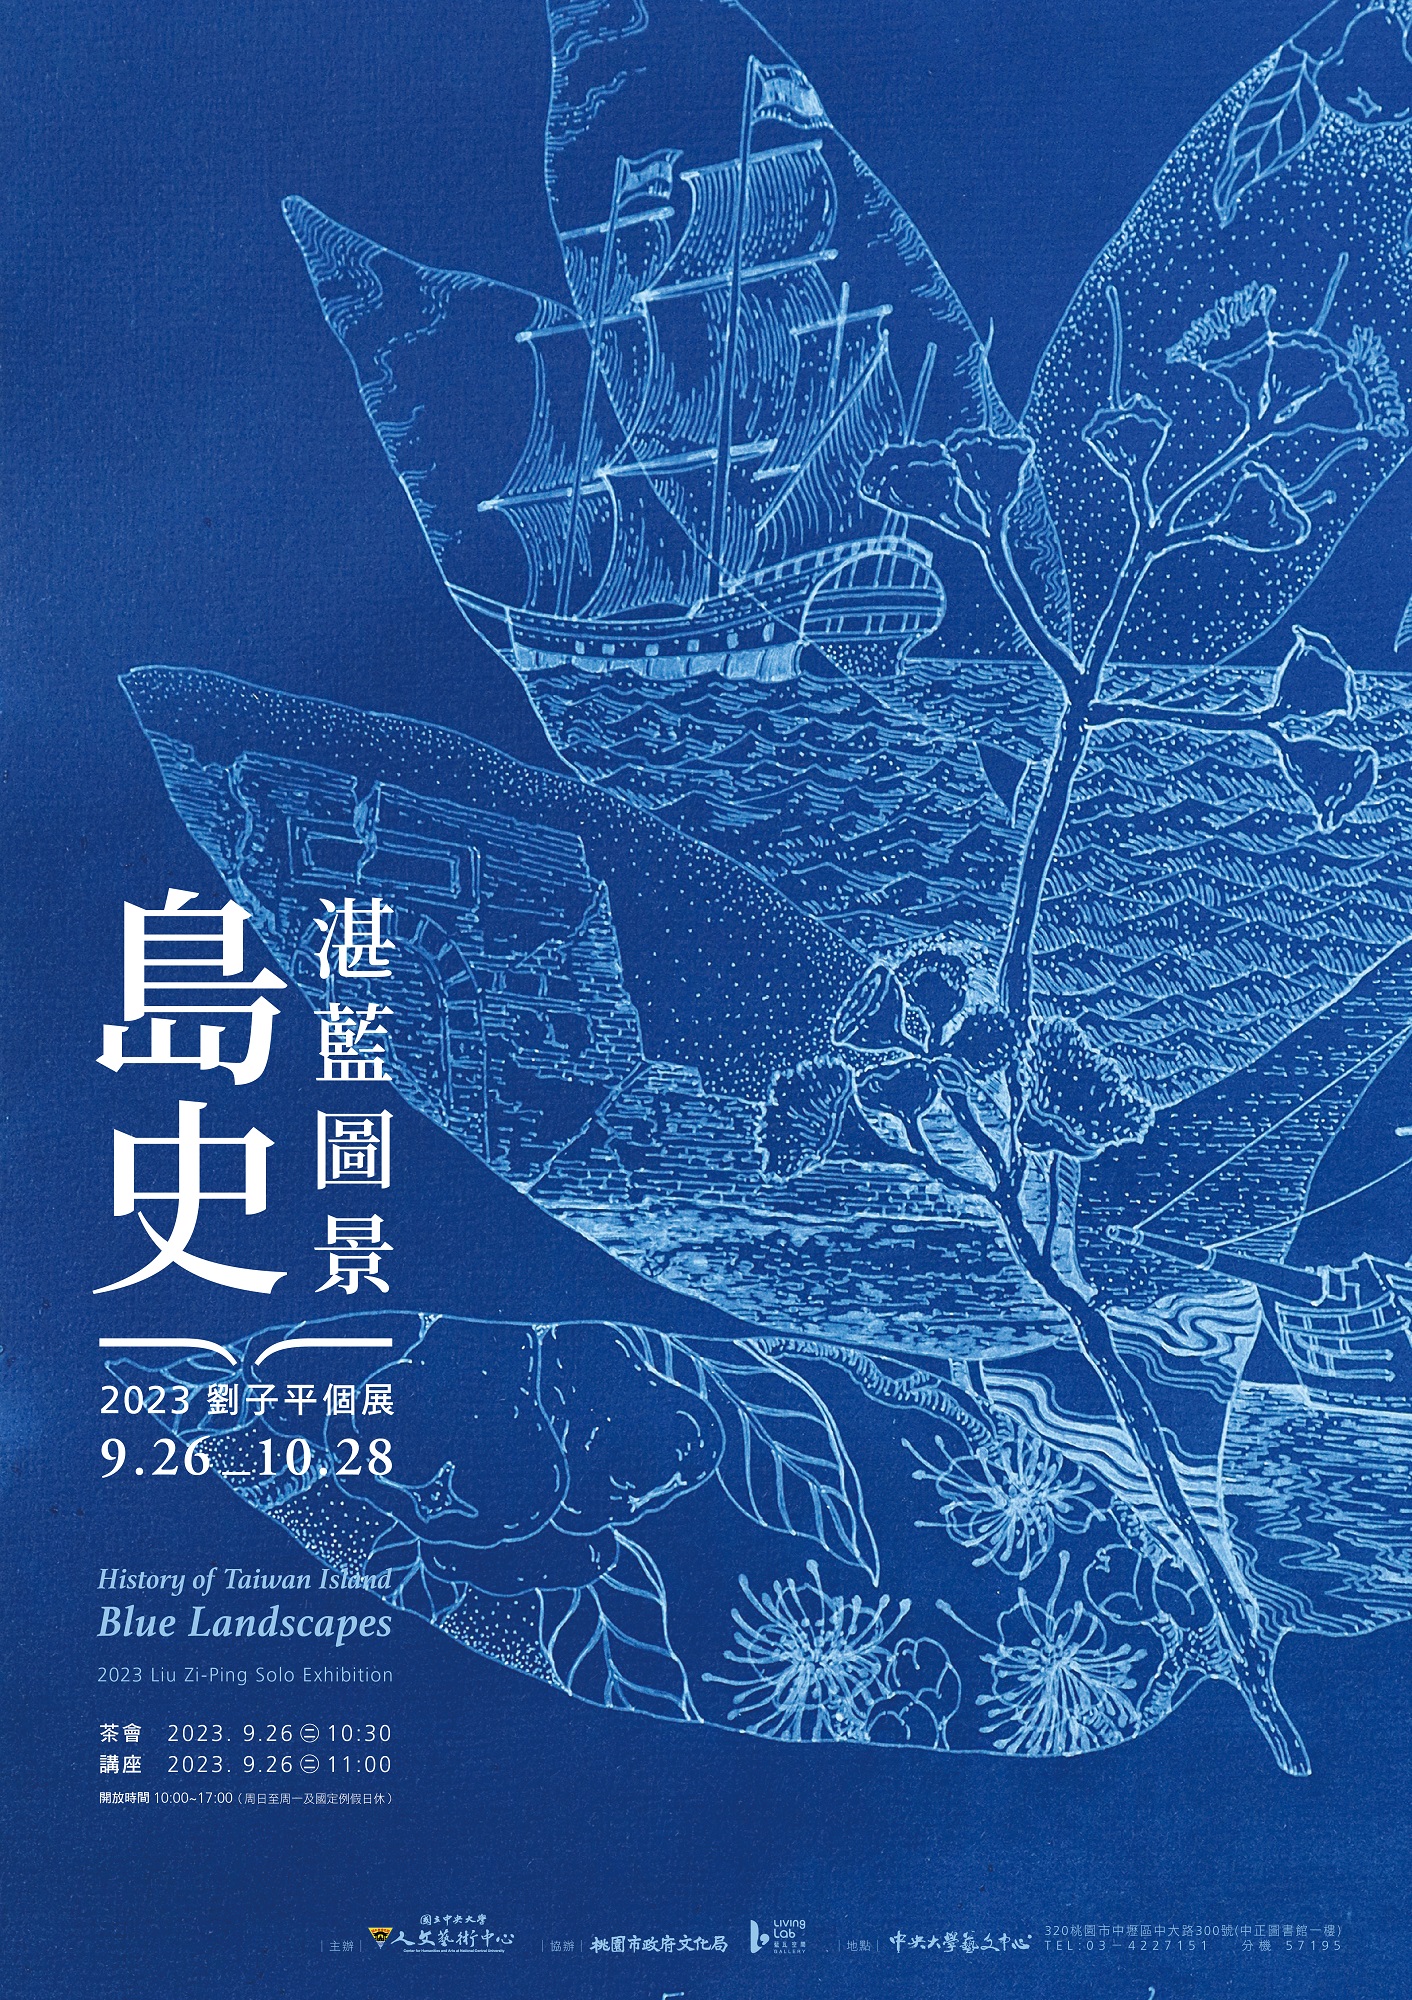 History of Taiwan Island : Blue Landscapes - 2023 Liu Zi-Ping Solo Exhibition